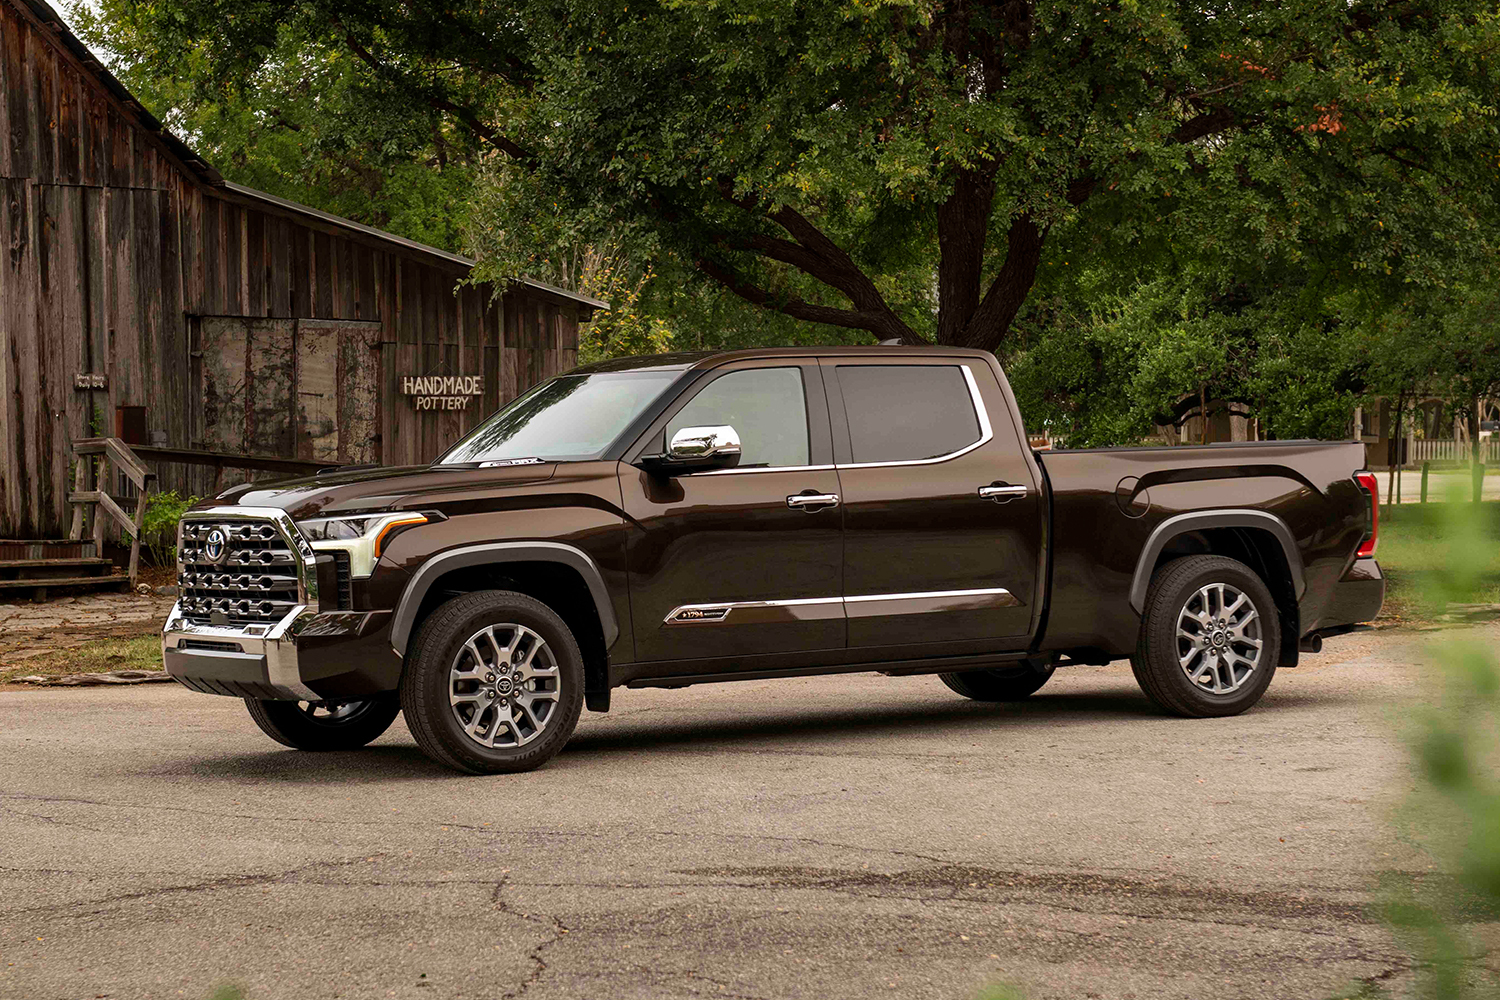 The 2022 Toyota Tundra 1974 Edition pickup truck in smoked mesquite brown